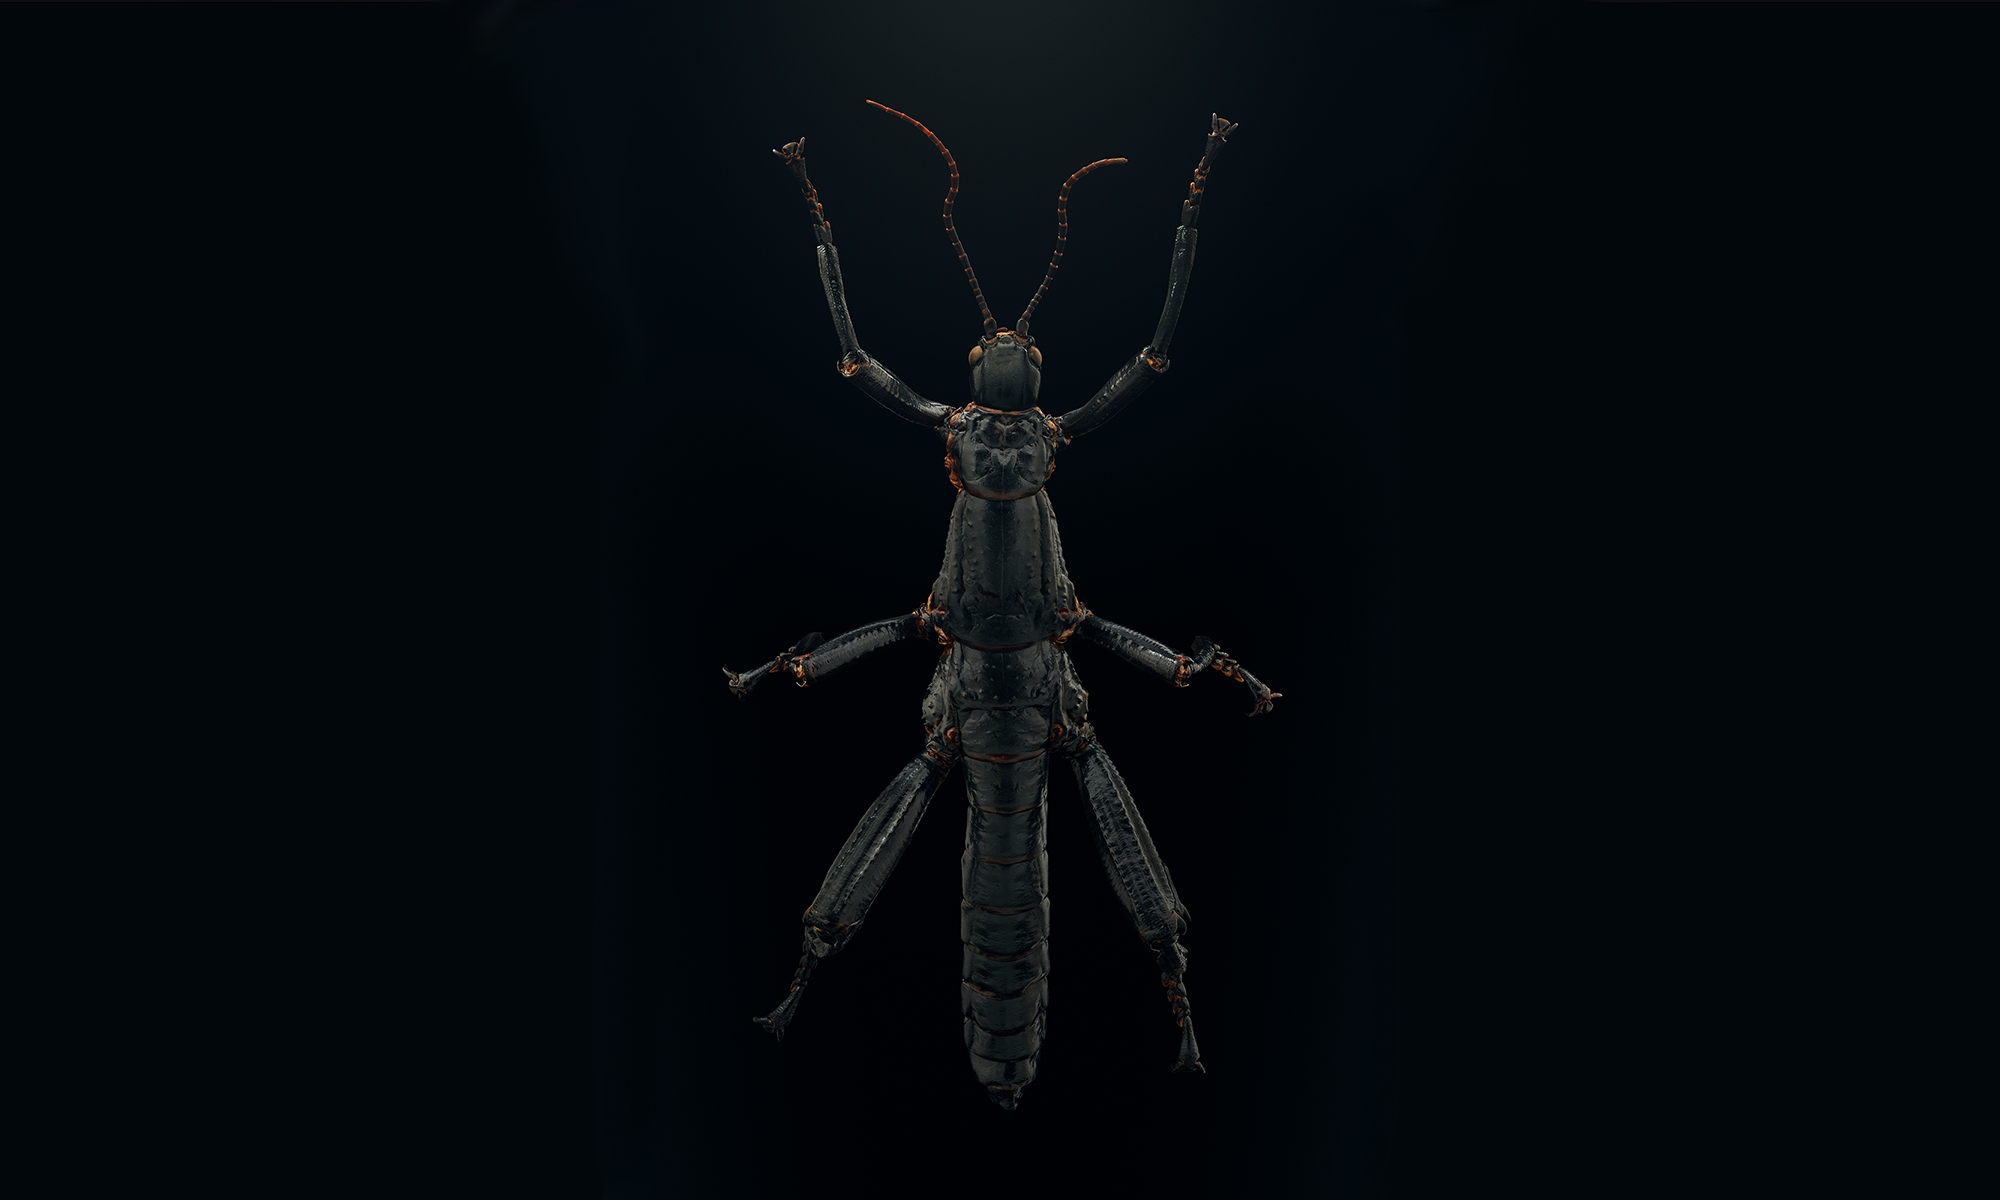 a large black stick bug isolated on a black background